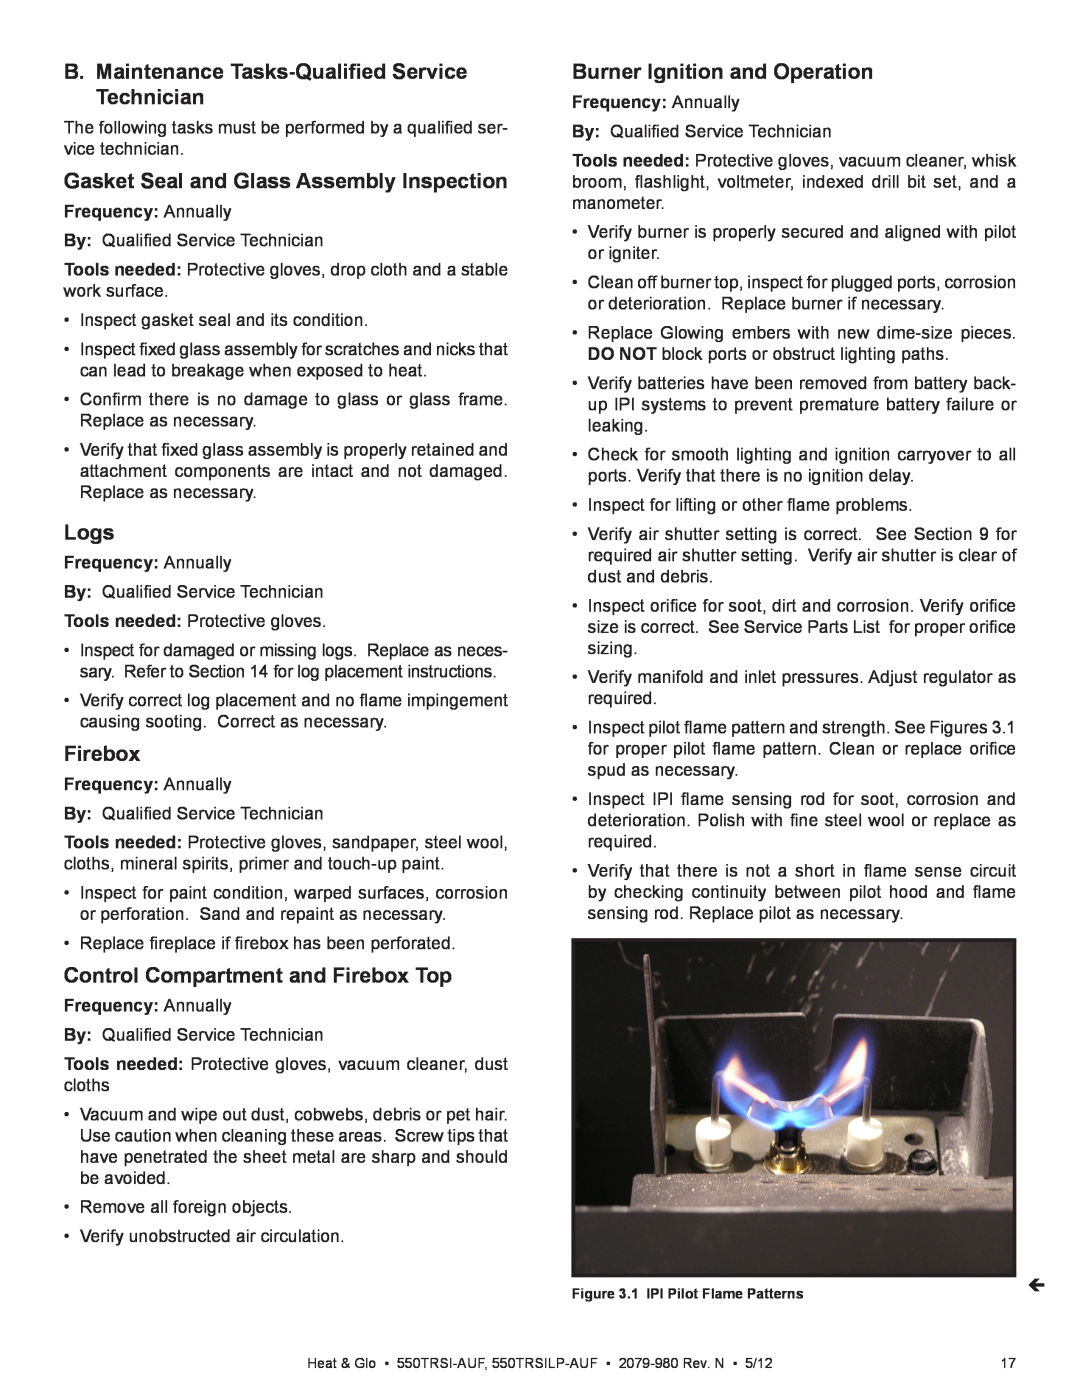 Heat & Glo LifeStyle 550TRSI-AUF B.Maintenance Tasks-QualifiedService Technician, Logs, Firebox, Frequency: Annually 